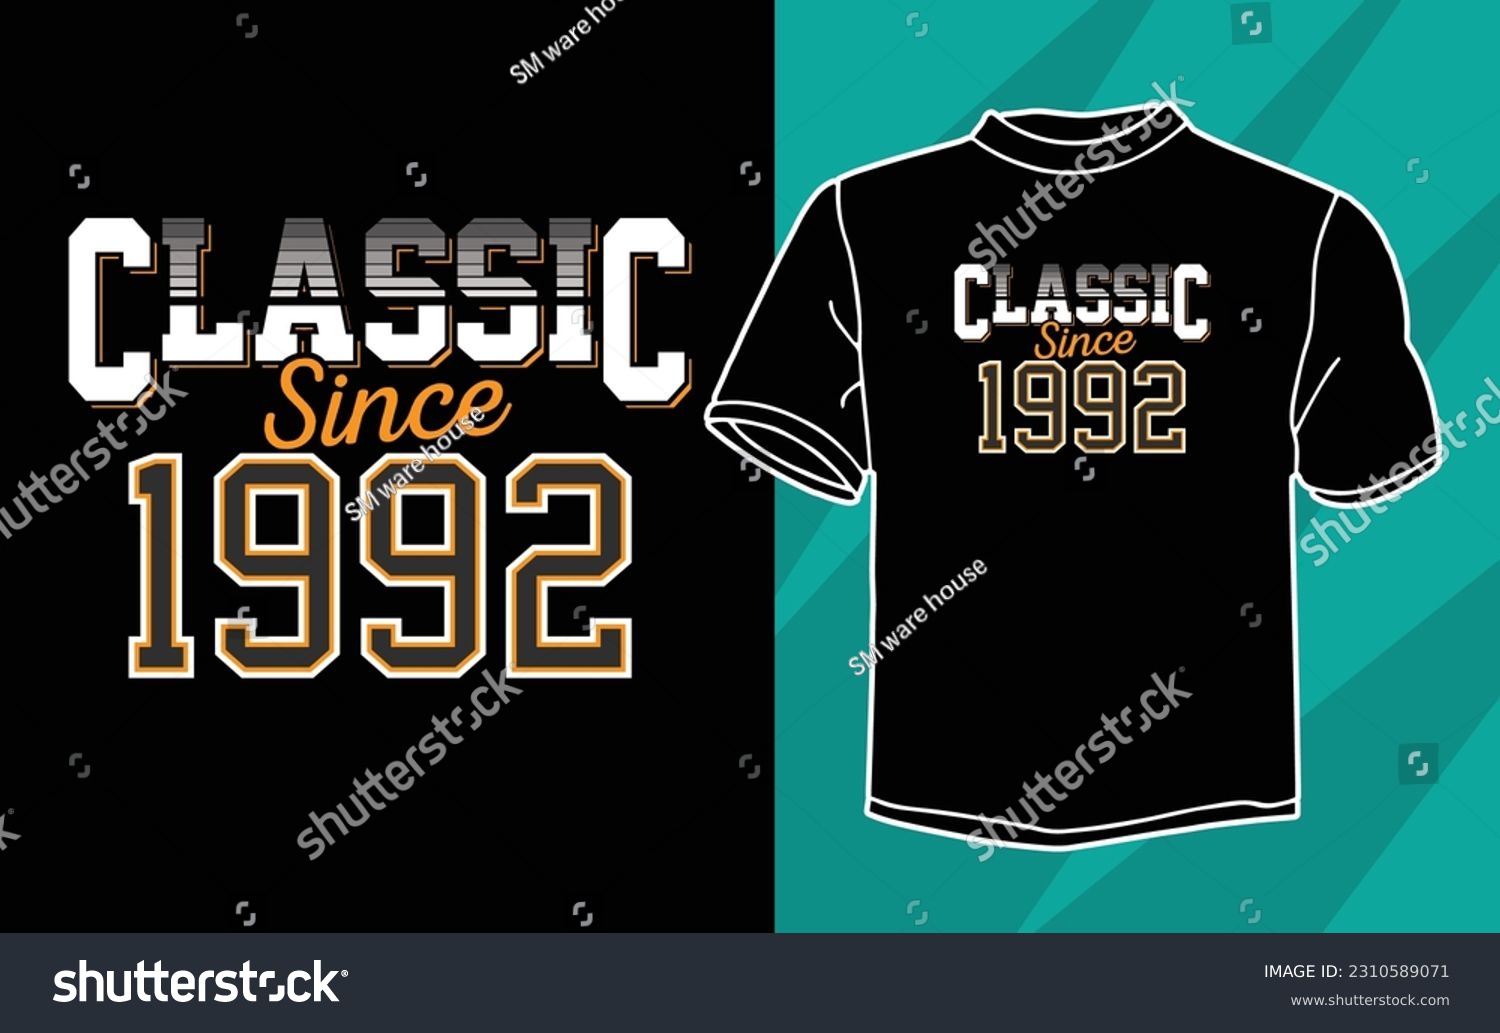 SVG of classic since typography birthday t shirt design svg